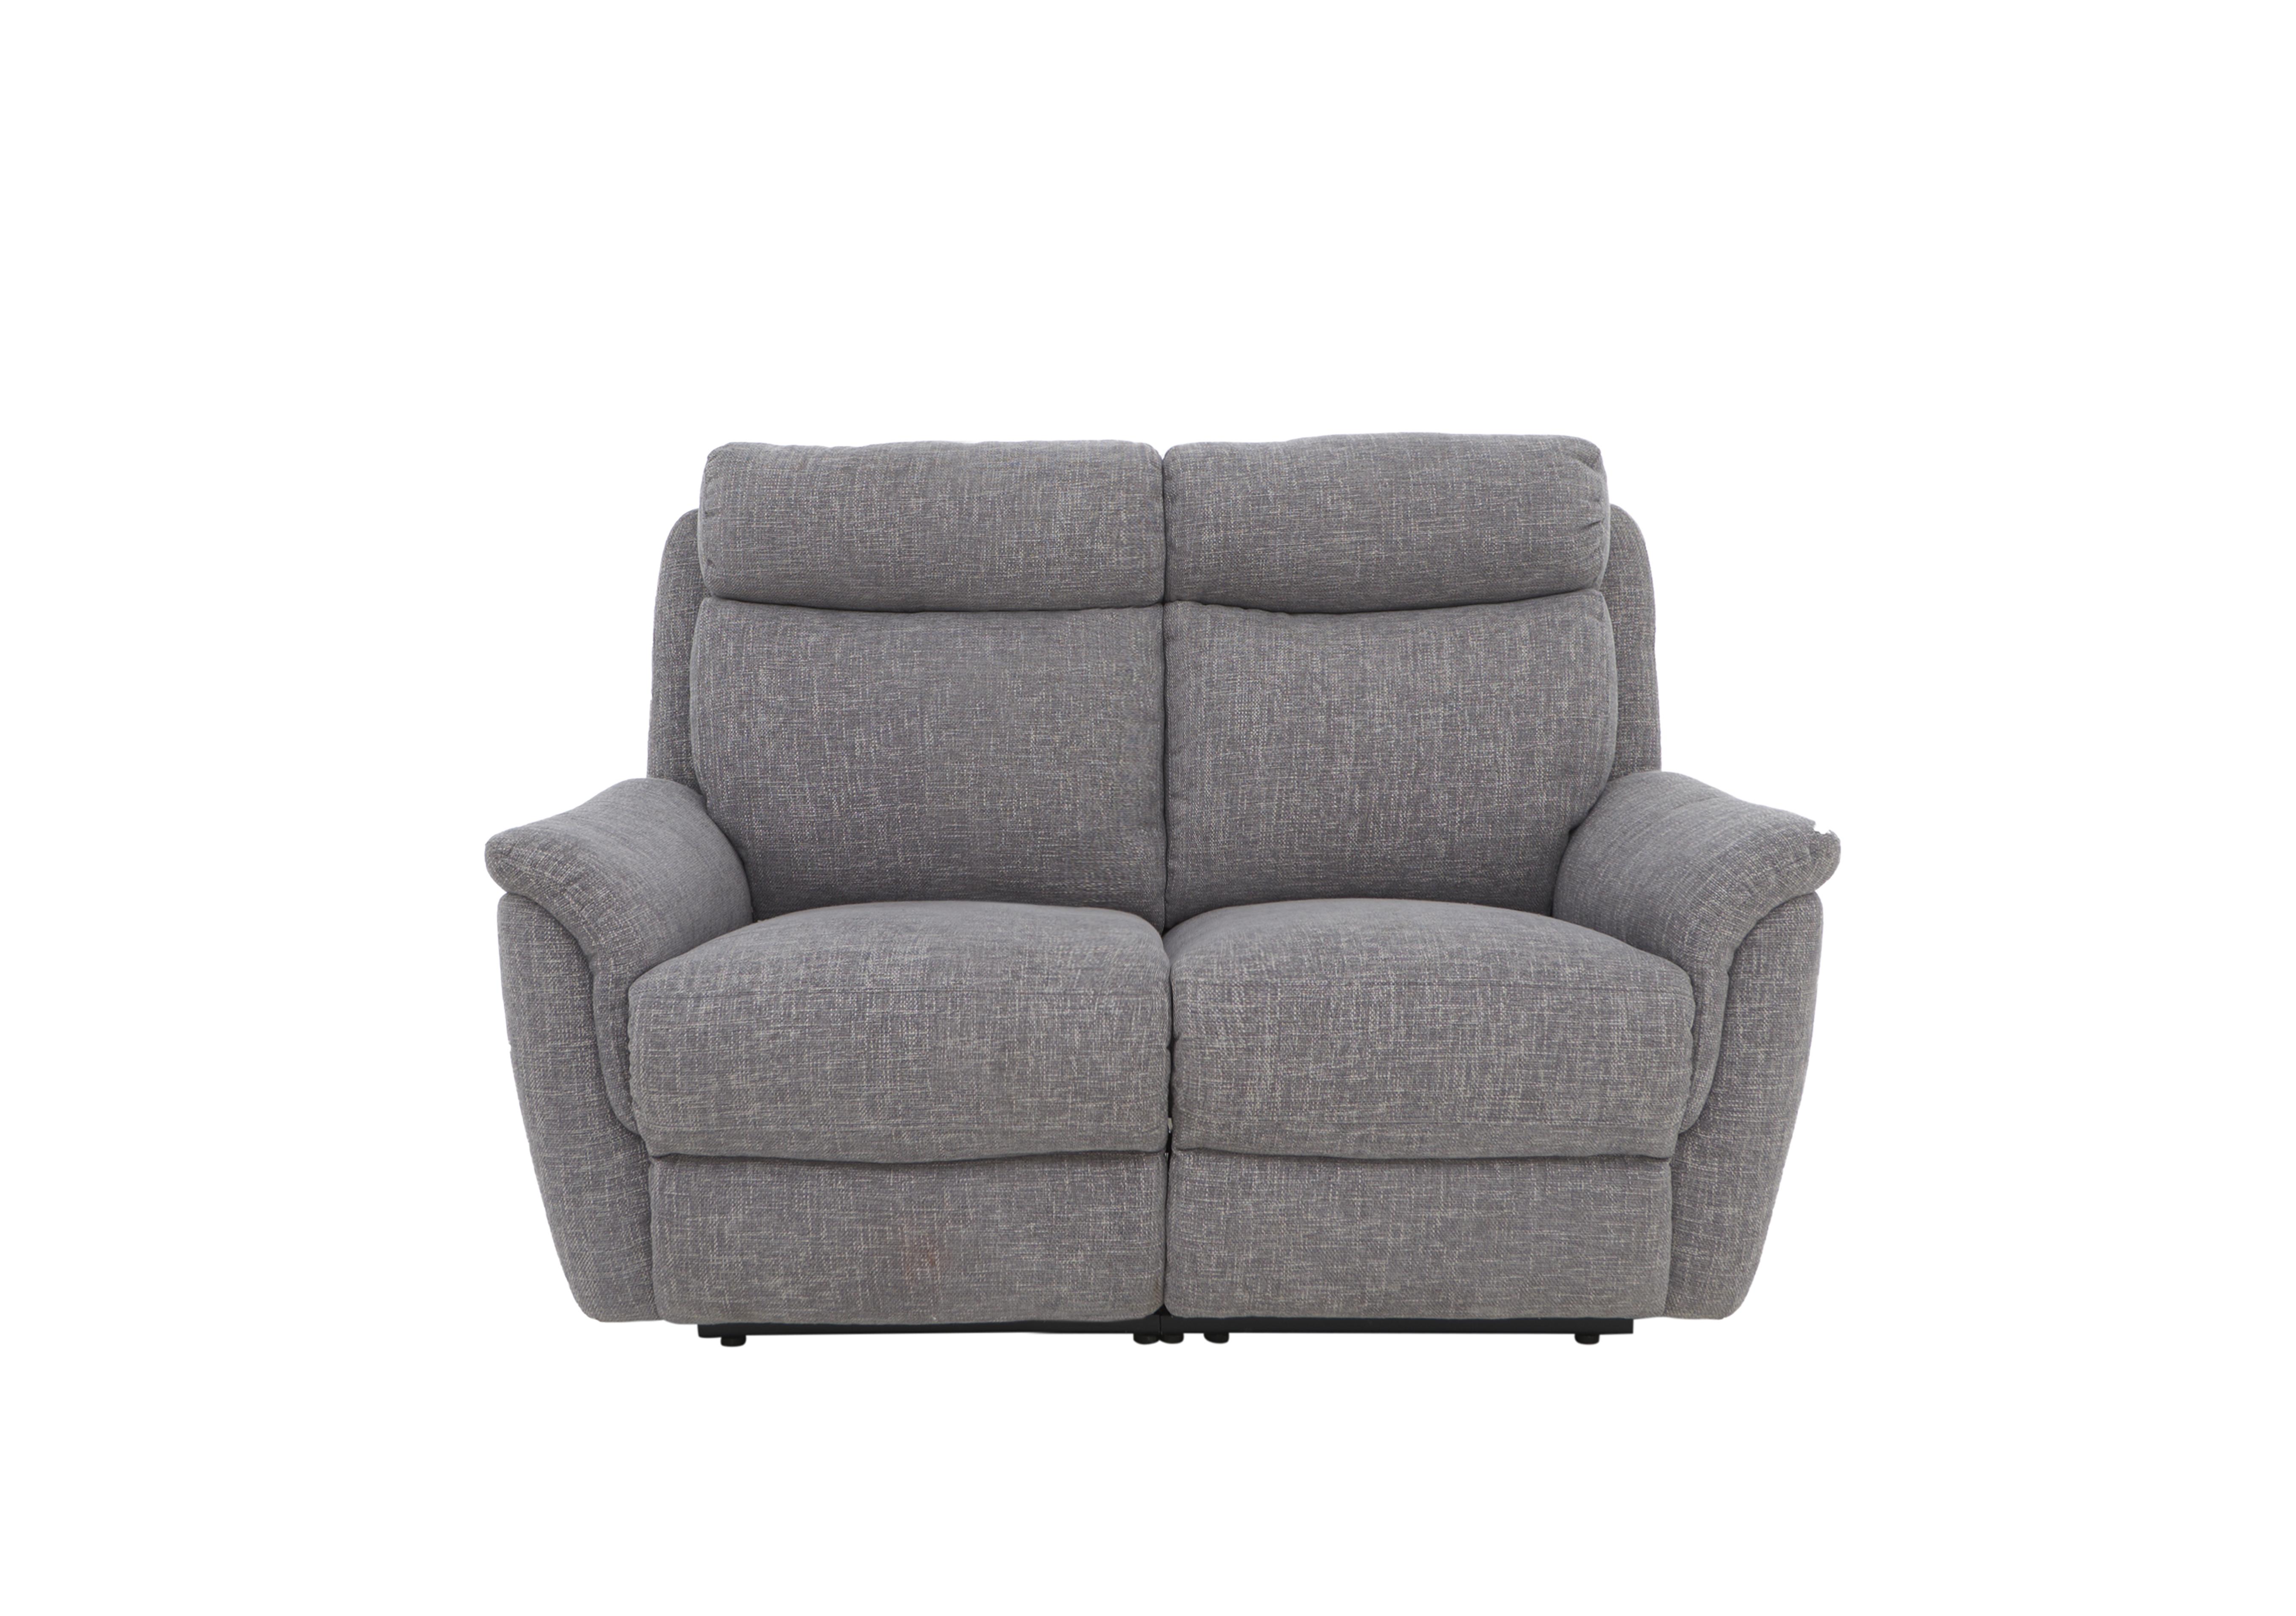 Orlando 2 Seater Fabric Power Recliner Sofa with Power Headrests and Lumbar Support in Anivia Grey 12445 on Furniture Village